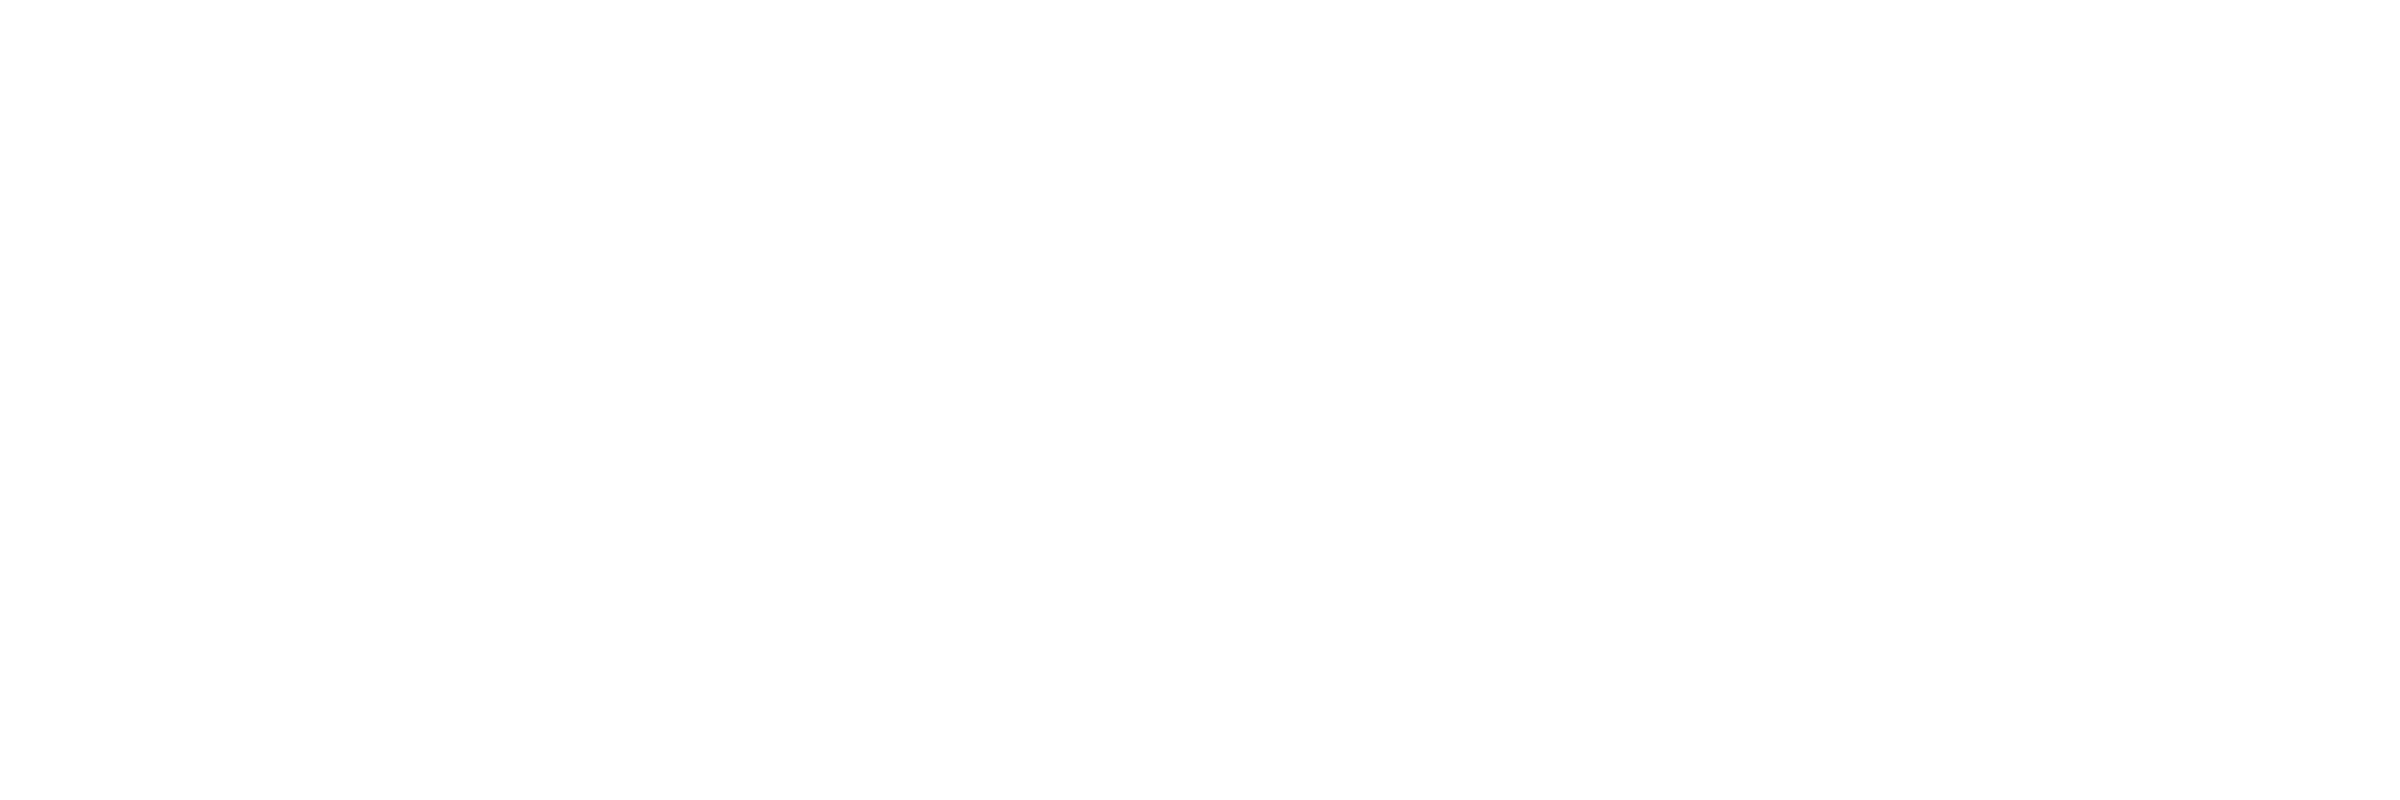 Traveluxe Official